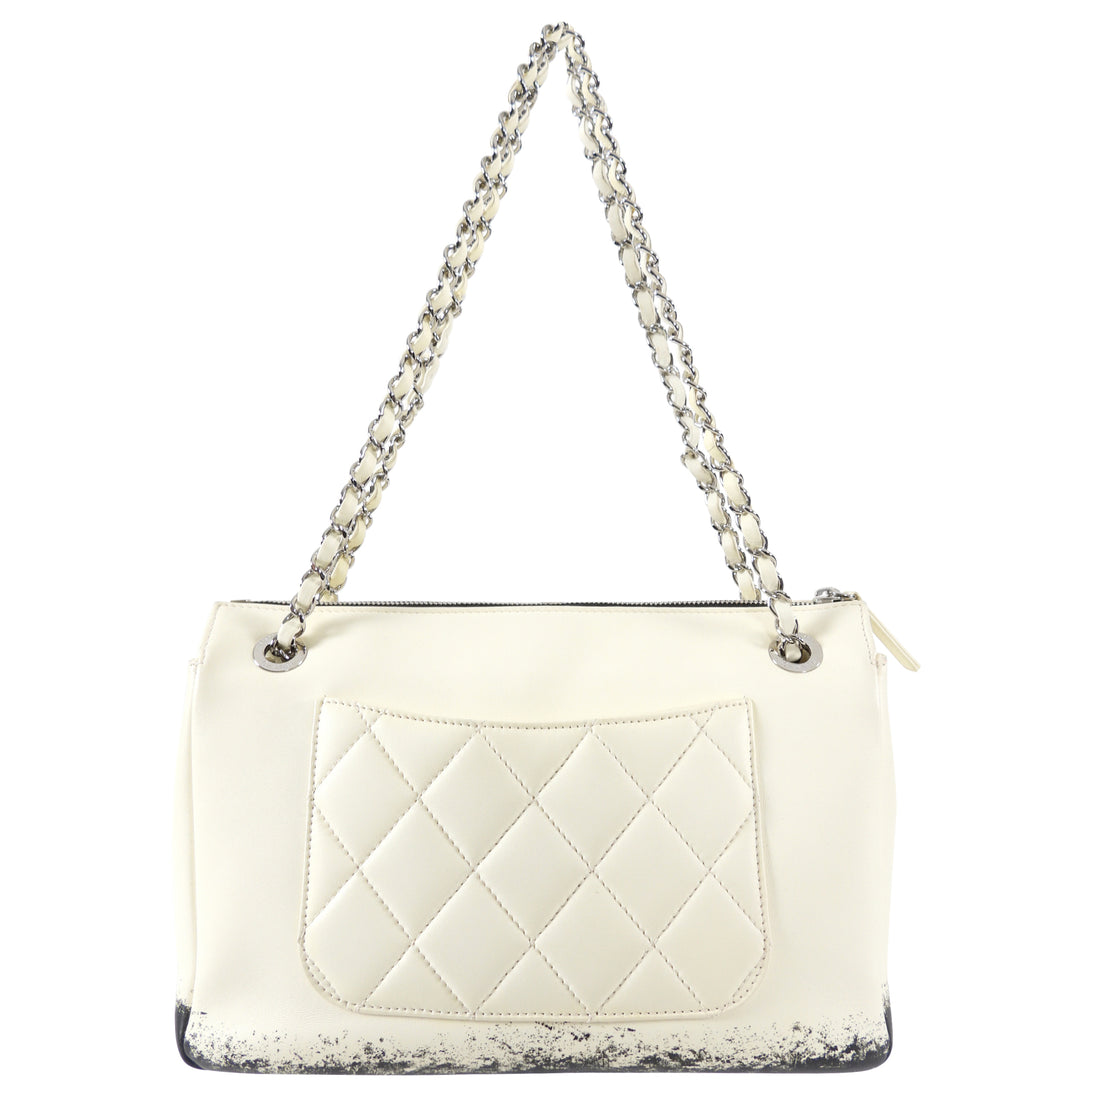 Chanel Cream and Black Dip Quilted Flap Bag – I MISS YOU VINTAGE